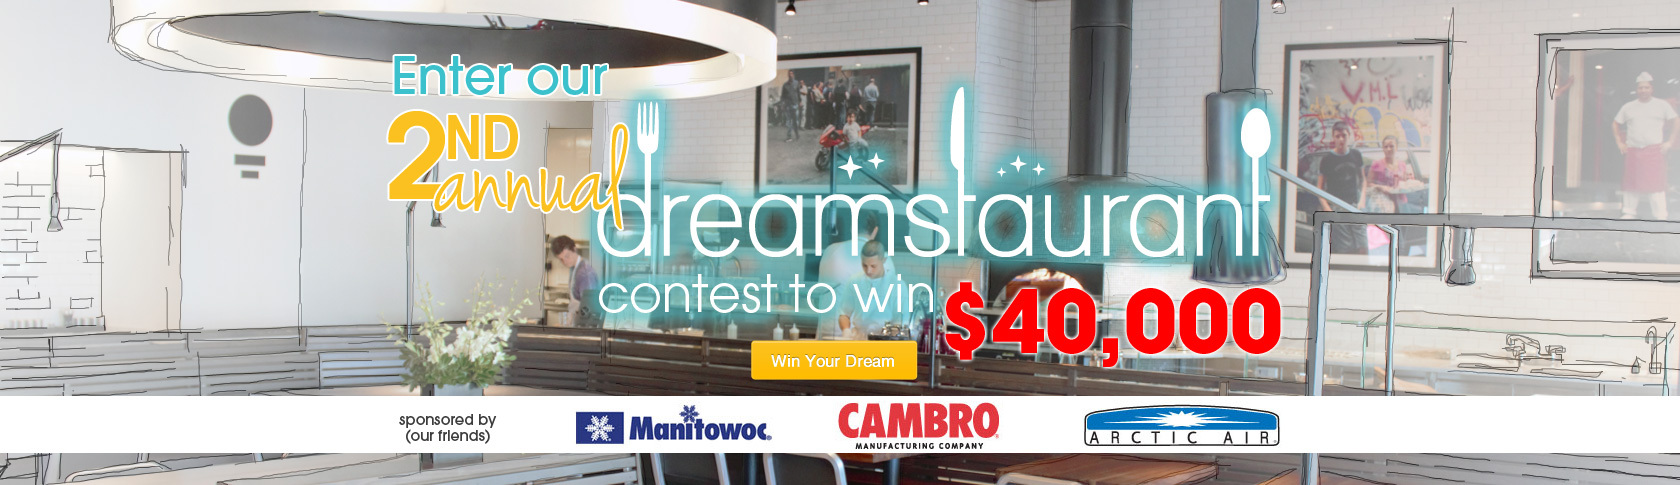 2nd Annual Dreamstaurant Contest